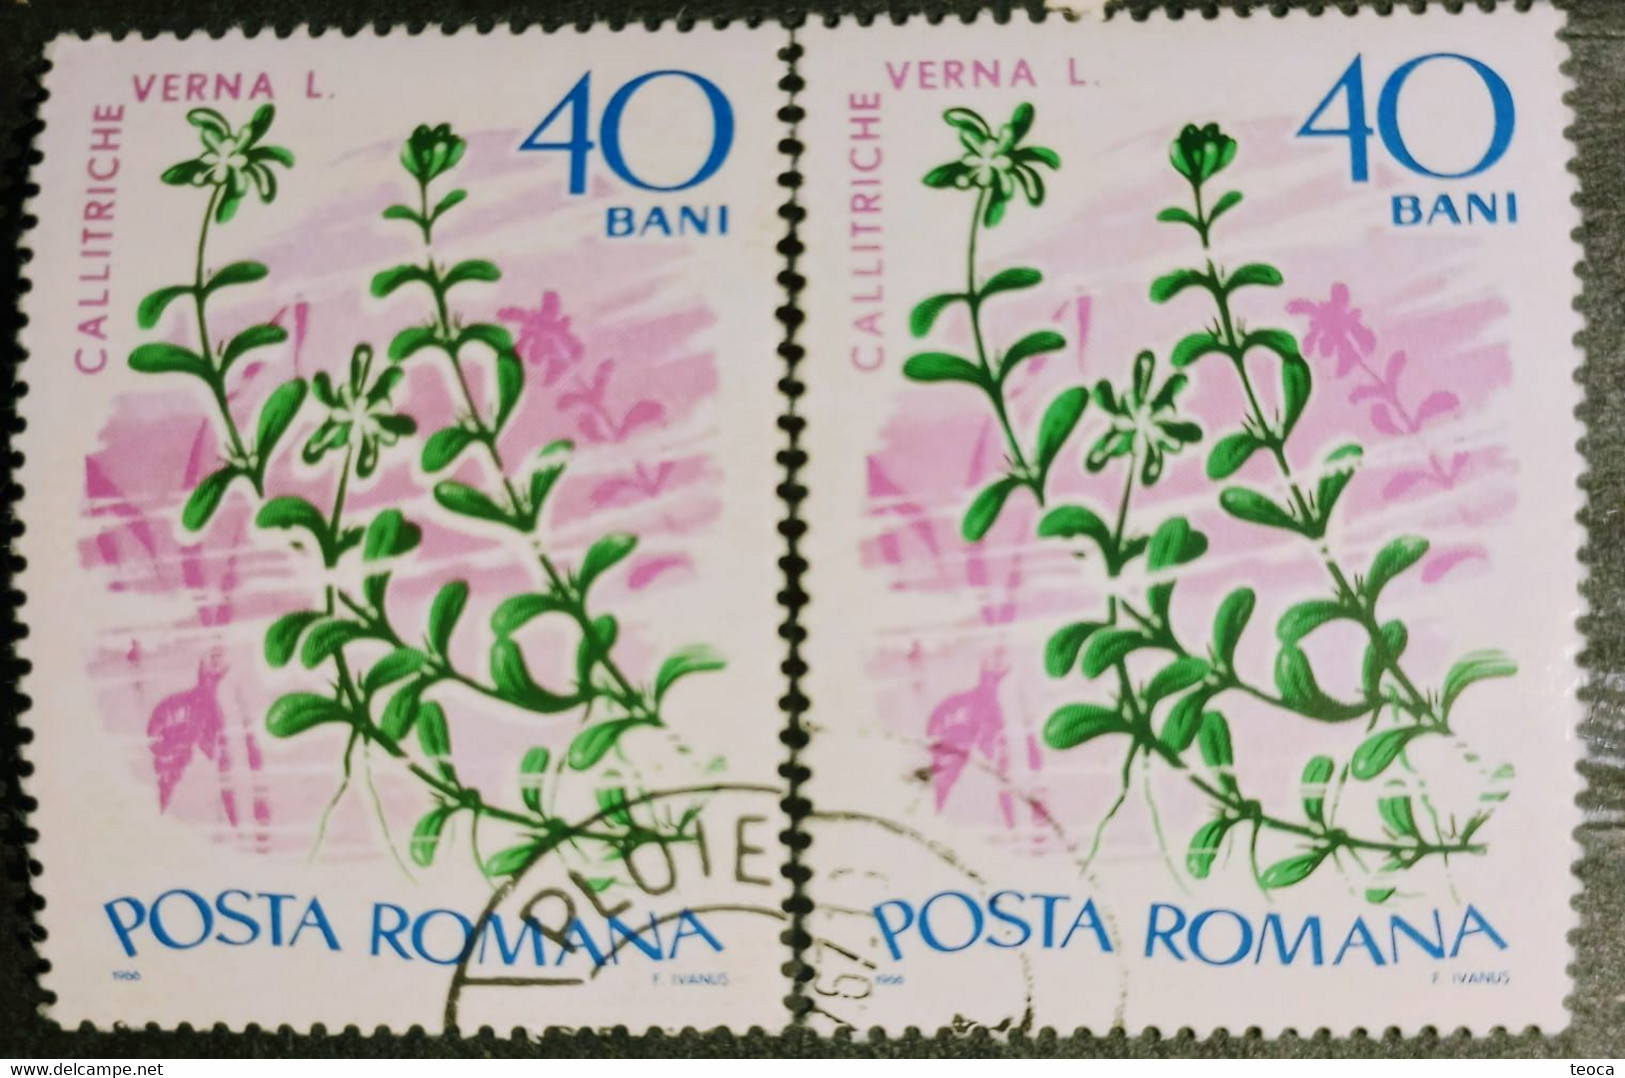 Stamps Errors Romania 1966 # Mi 2528 Printed With Misplaced Plants Flower Image Used - Plaatfouten En Curiosa